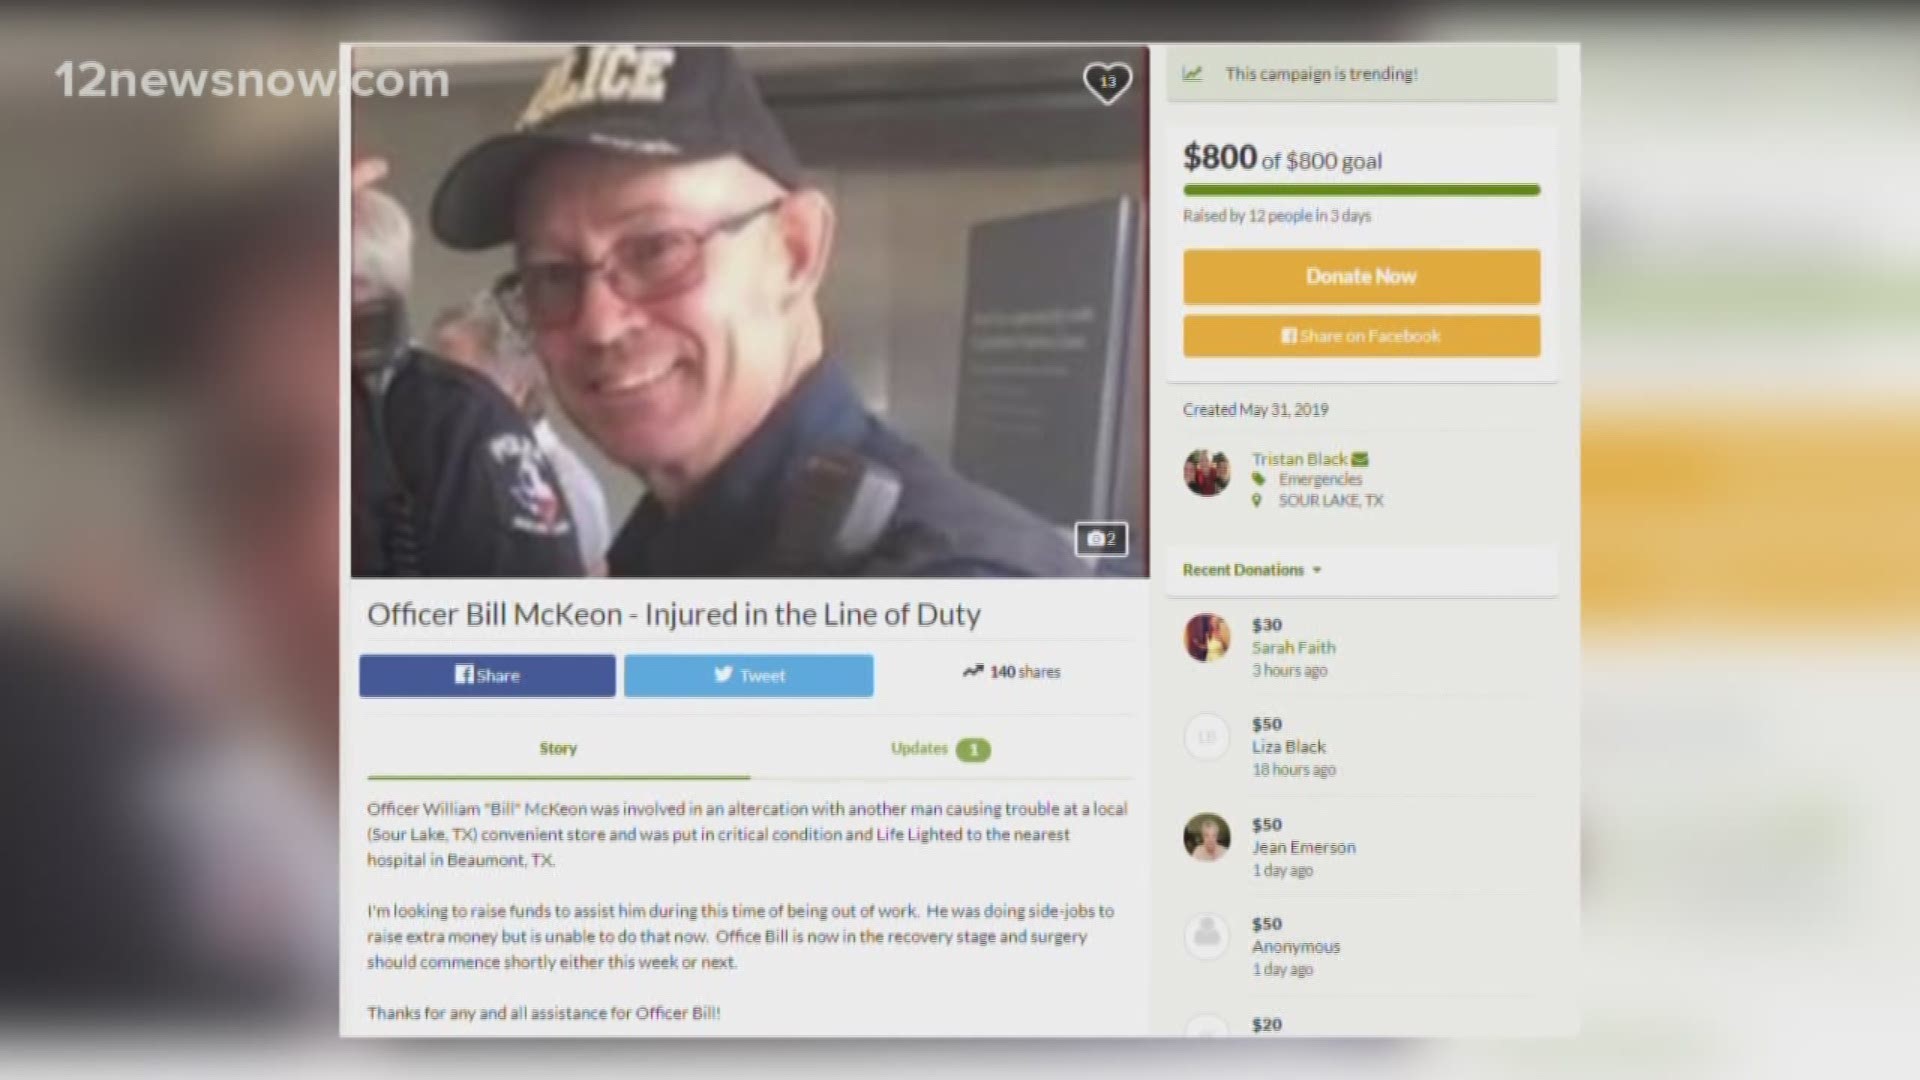 "I am just ready for him to get back on his feet and do what he loves to do." Tristan and Liza Black are just doing what they can to help Officer McKeon and his family. Officer McKeon is currently in a coma, according to his daughter's post on Facebook.